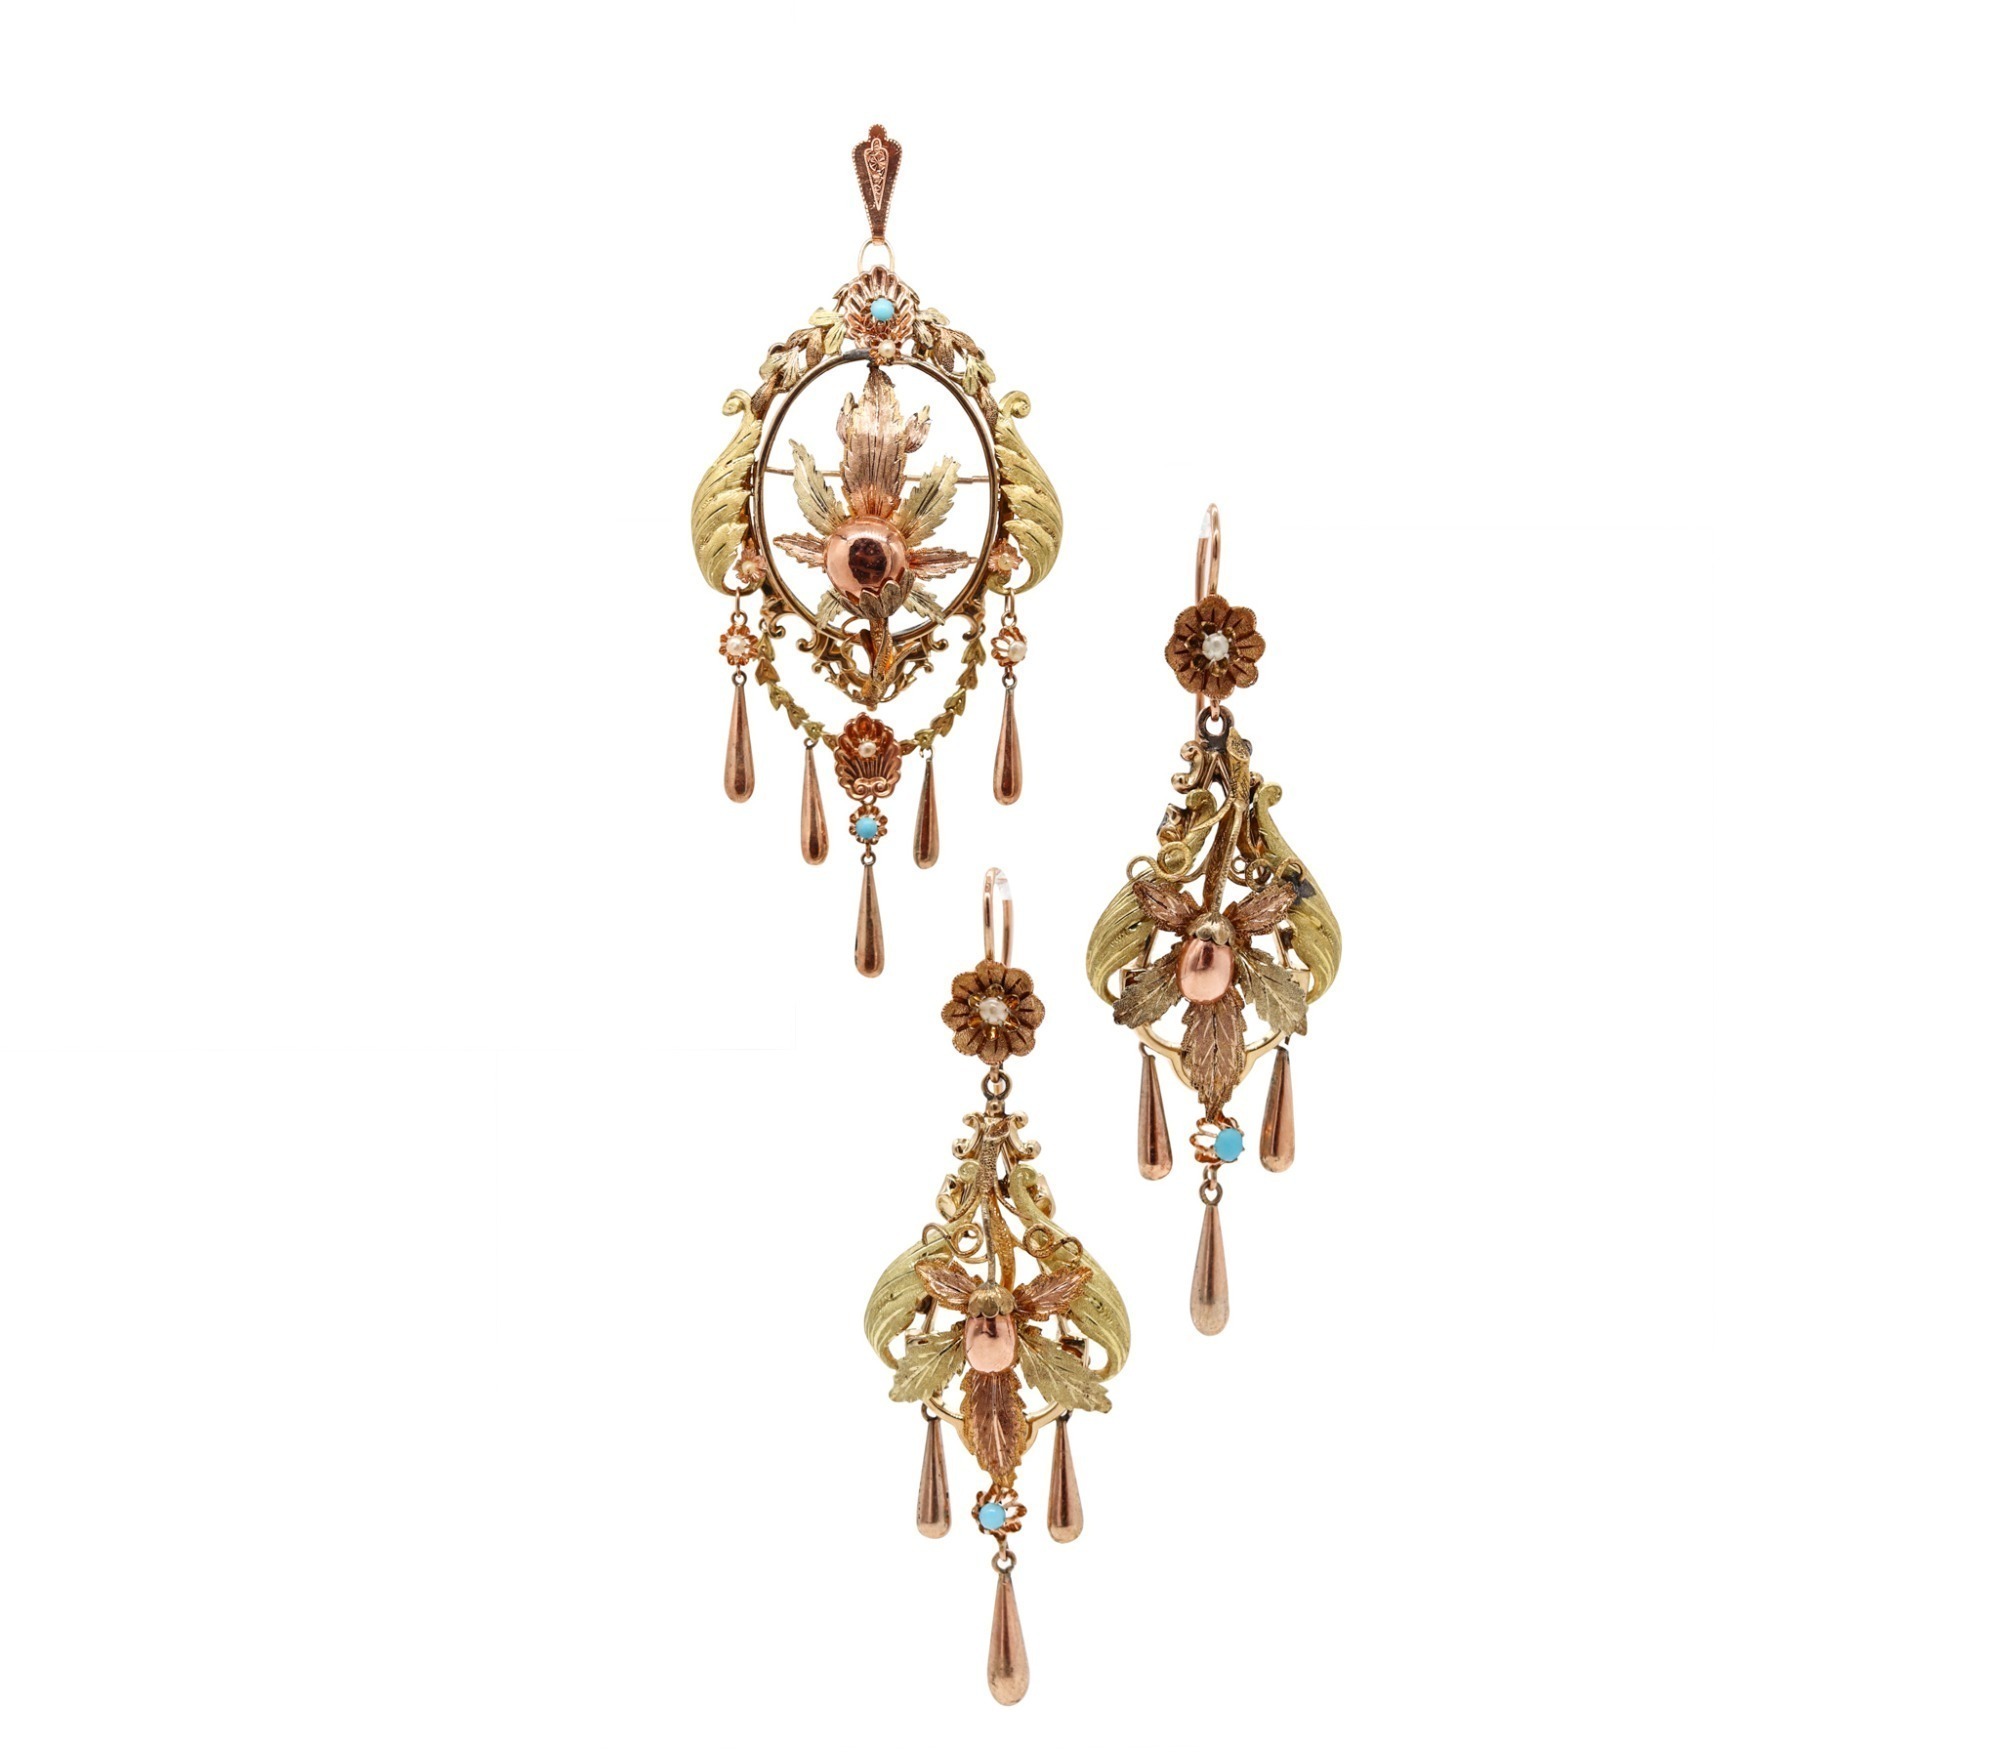 VICTORIAN 18K GOLD TRI-COLOR GOLD PENDANT-BROOCH AND EARRINGS SUITE, CIRCA 1890